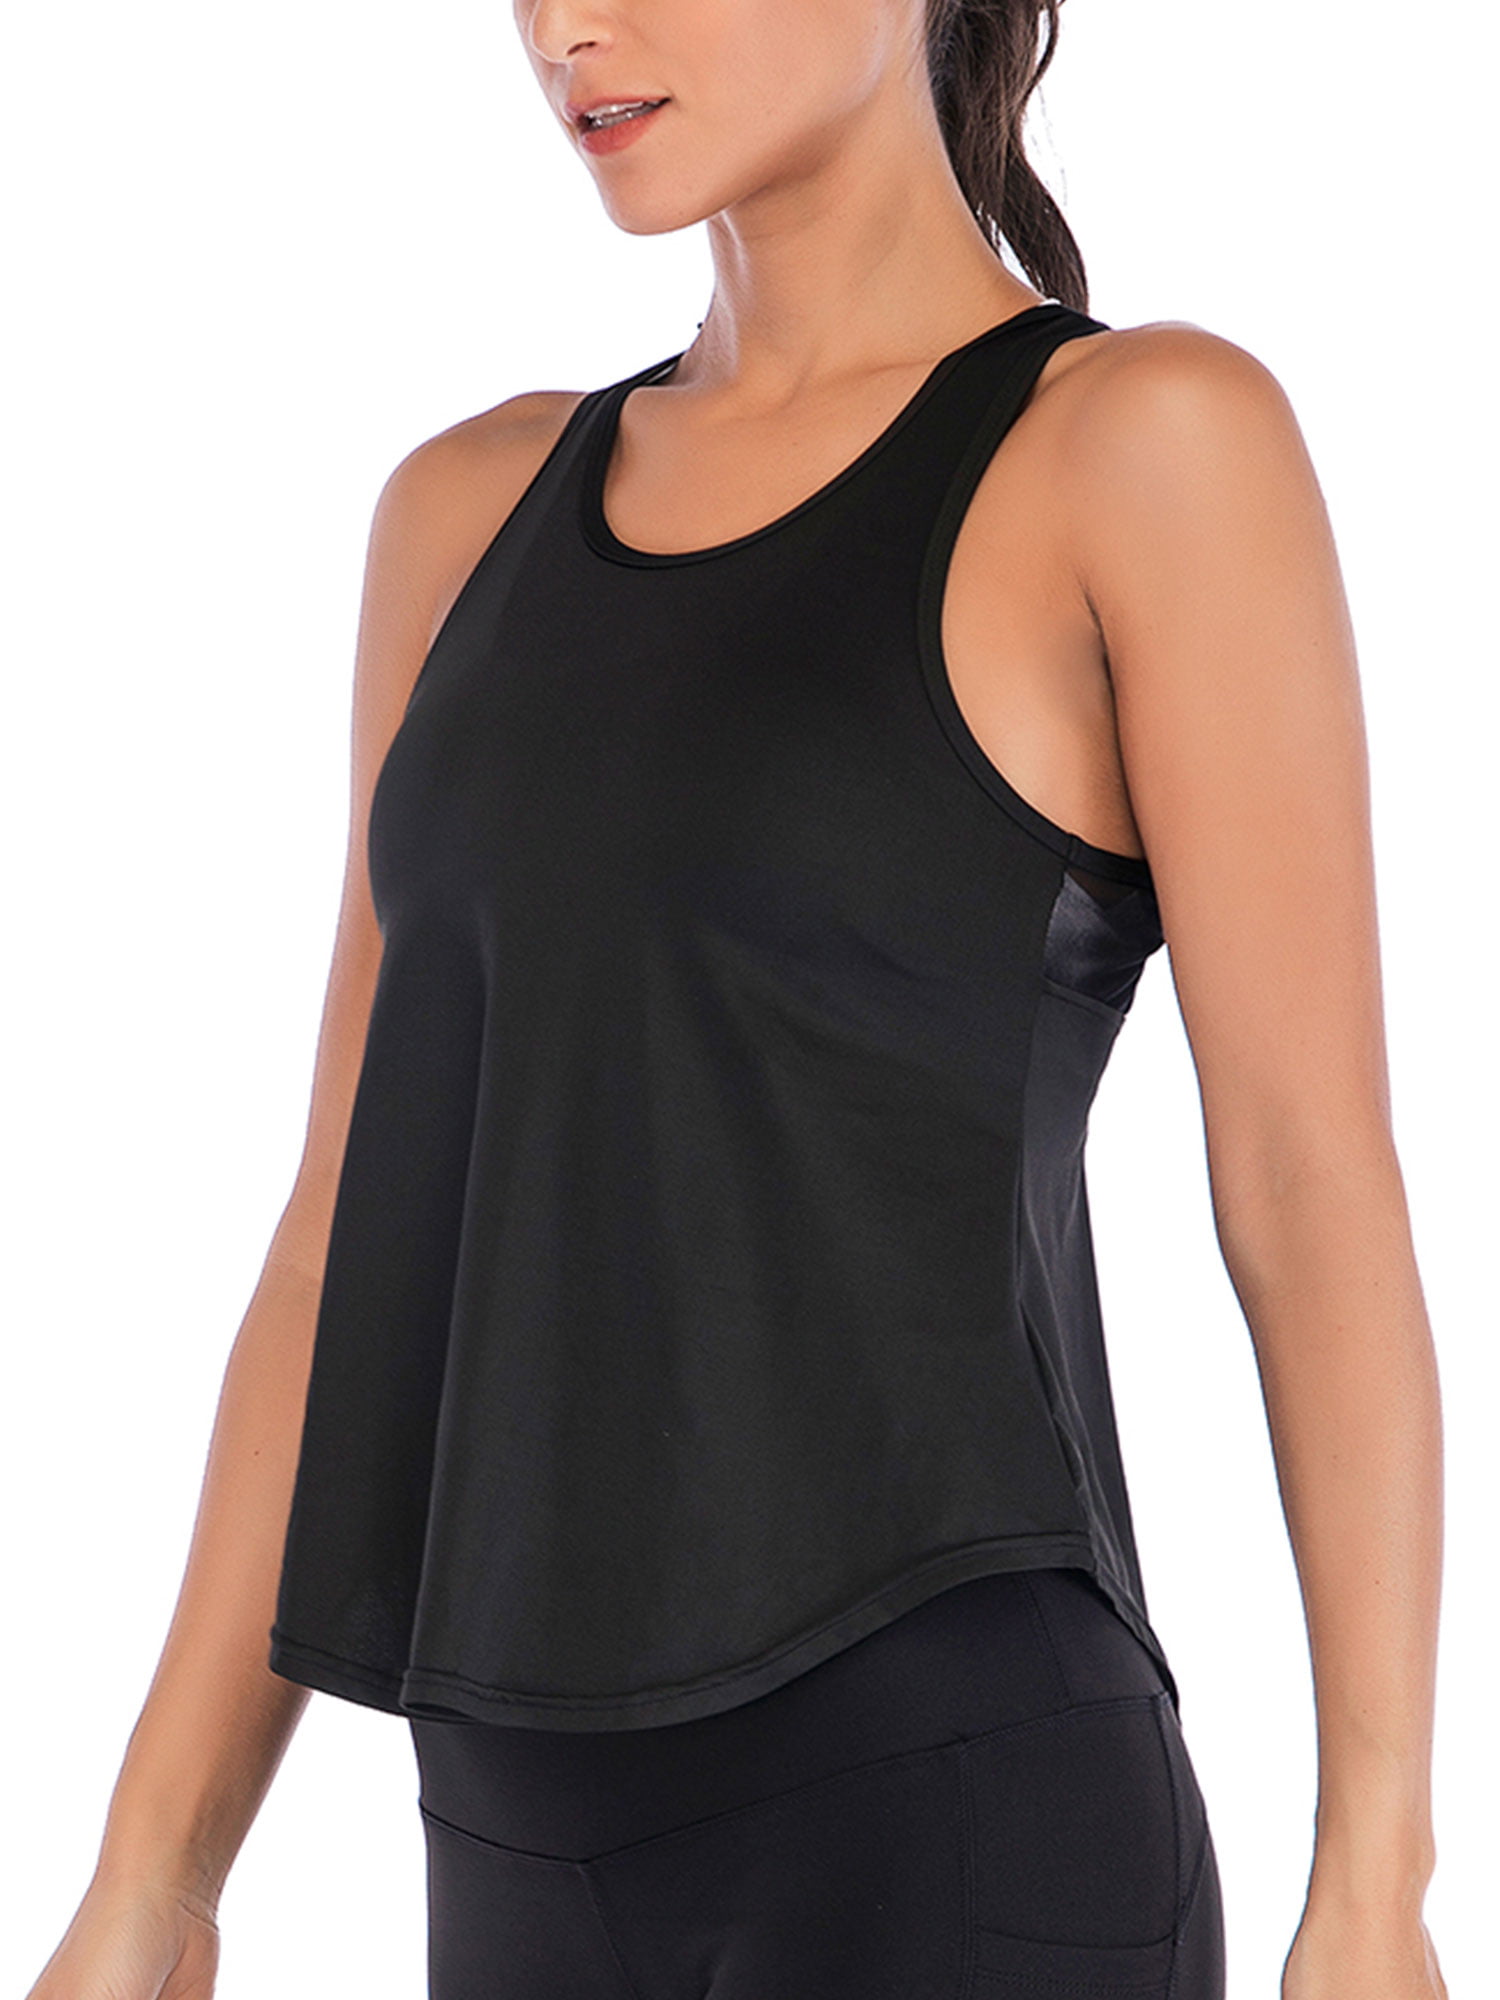 Womens Yoga Tops Workout Tank T-Shirts Fitness Vest Sports Training Singlet Running Athletic Strappy Sleeveless Blouse 